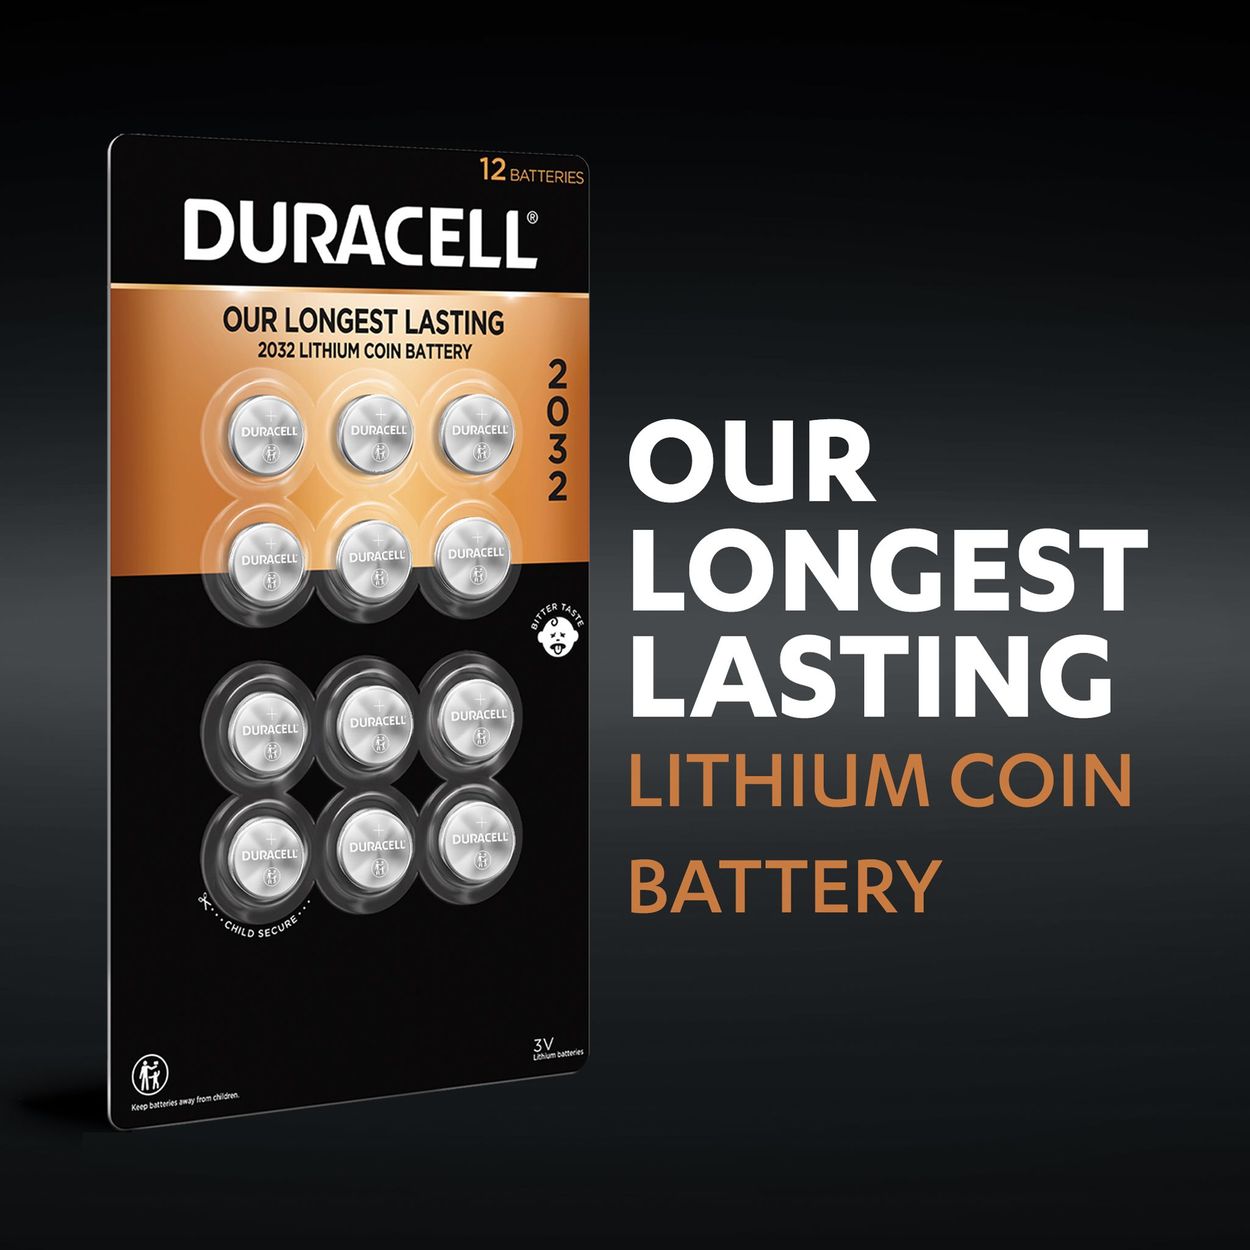 Duracell’s longest lasting 2032 lithium coin battery